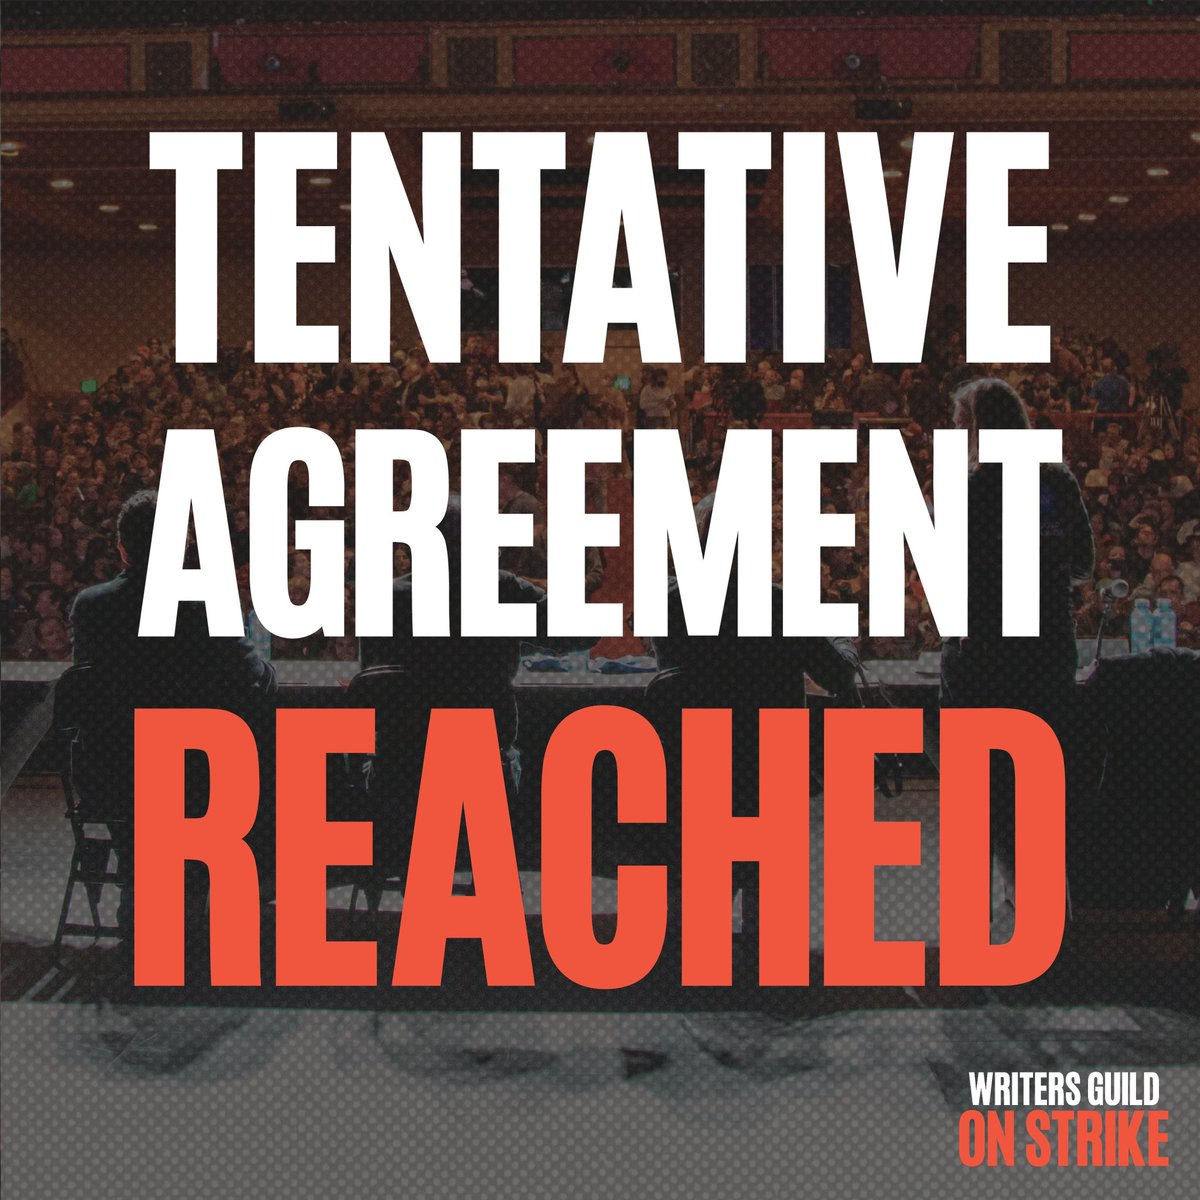 The WGA and AMPTP have reached a tentative agreement. This was made possible by the enduring solidarity of WGA members and extraordinary support of our union siblings who stood with us for over 146 days. More details coming after contract language is finalized. #WGAStrike